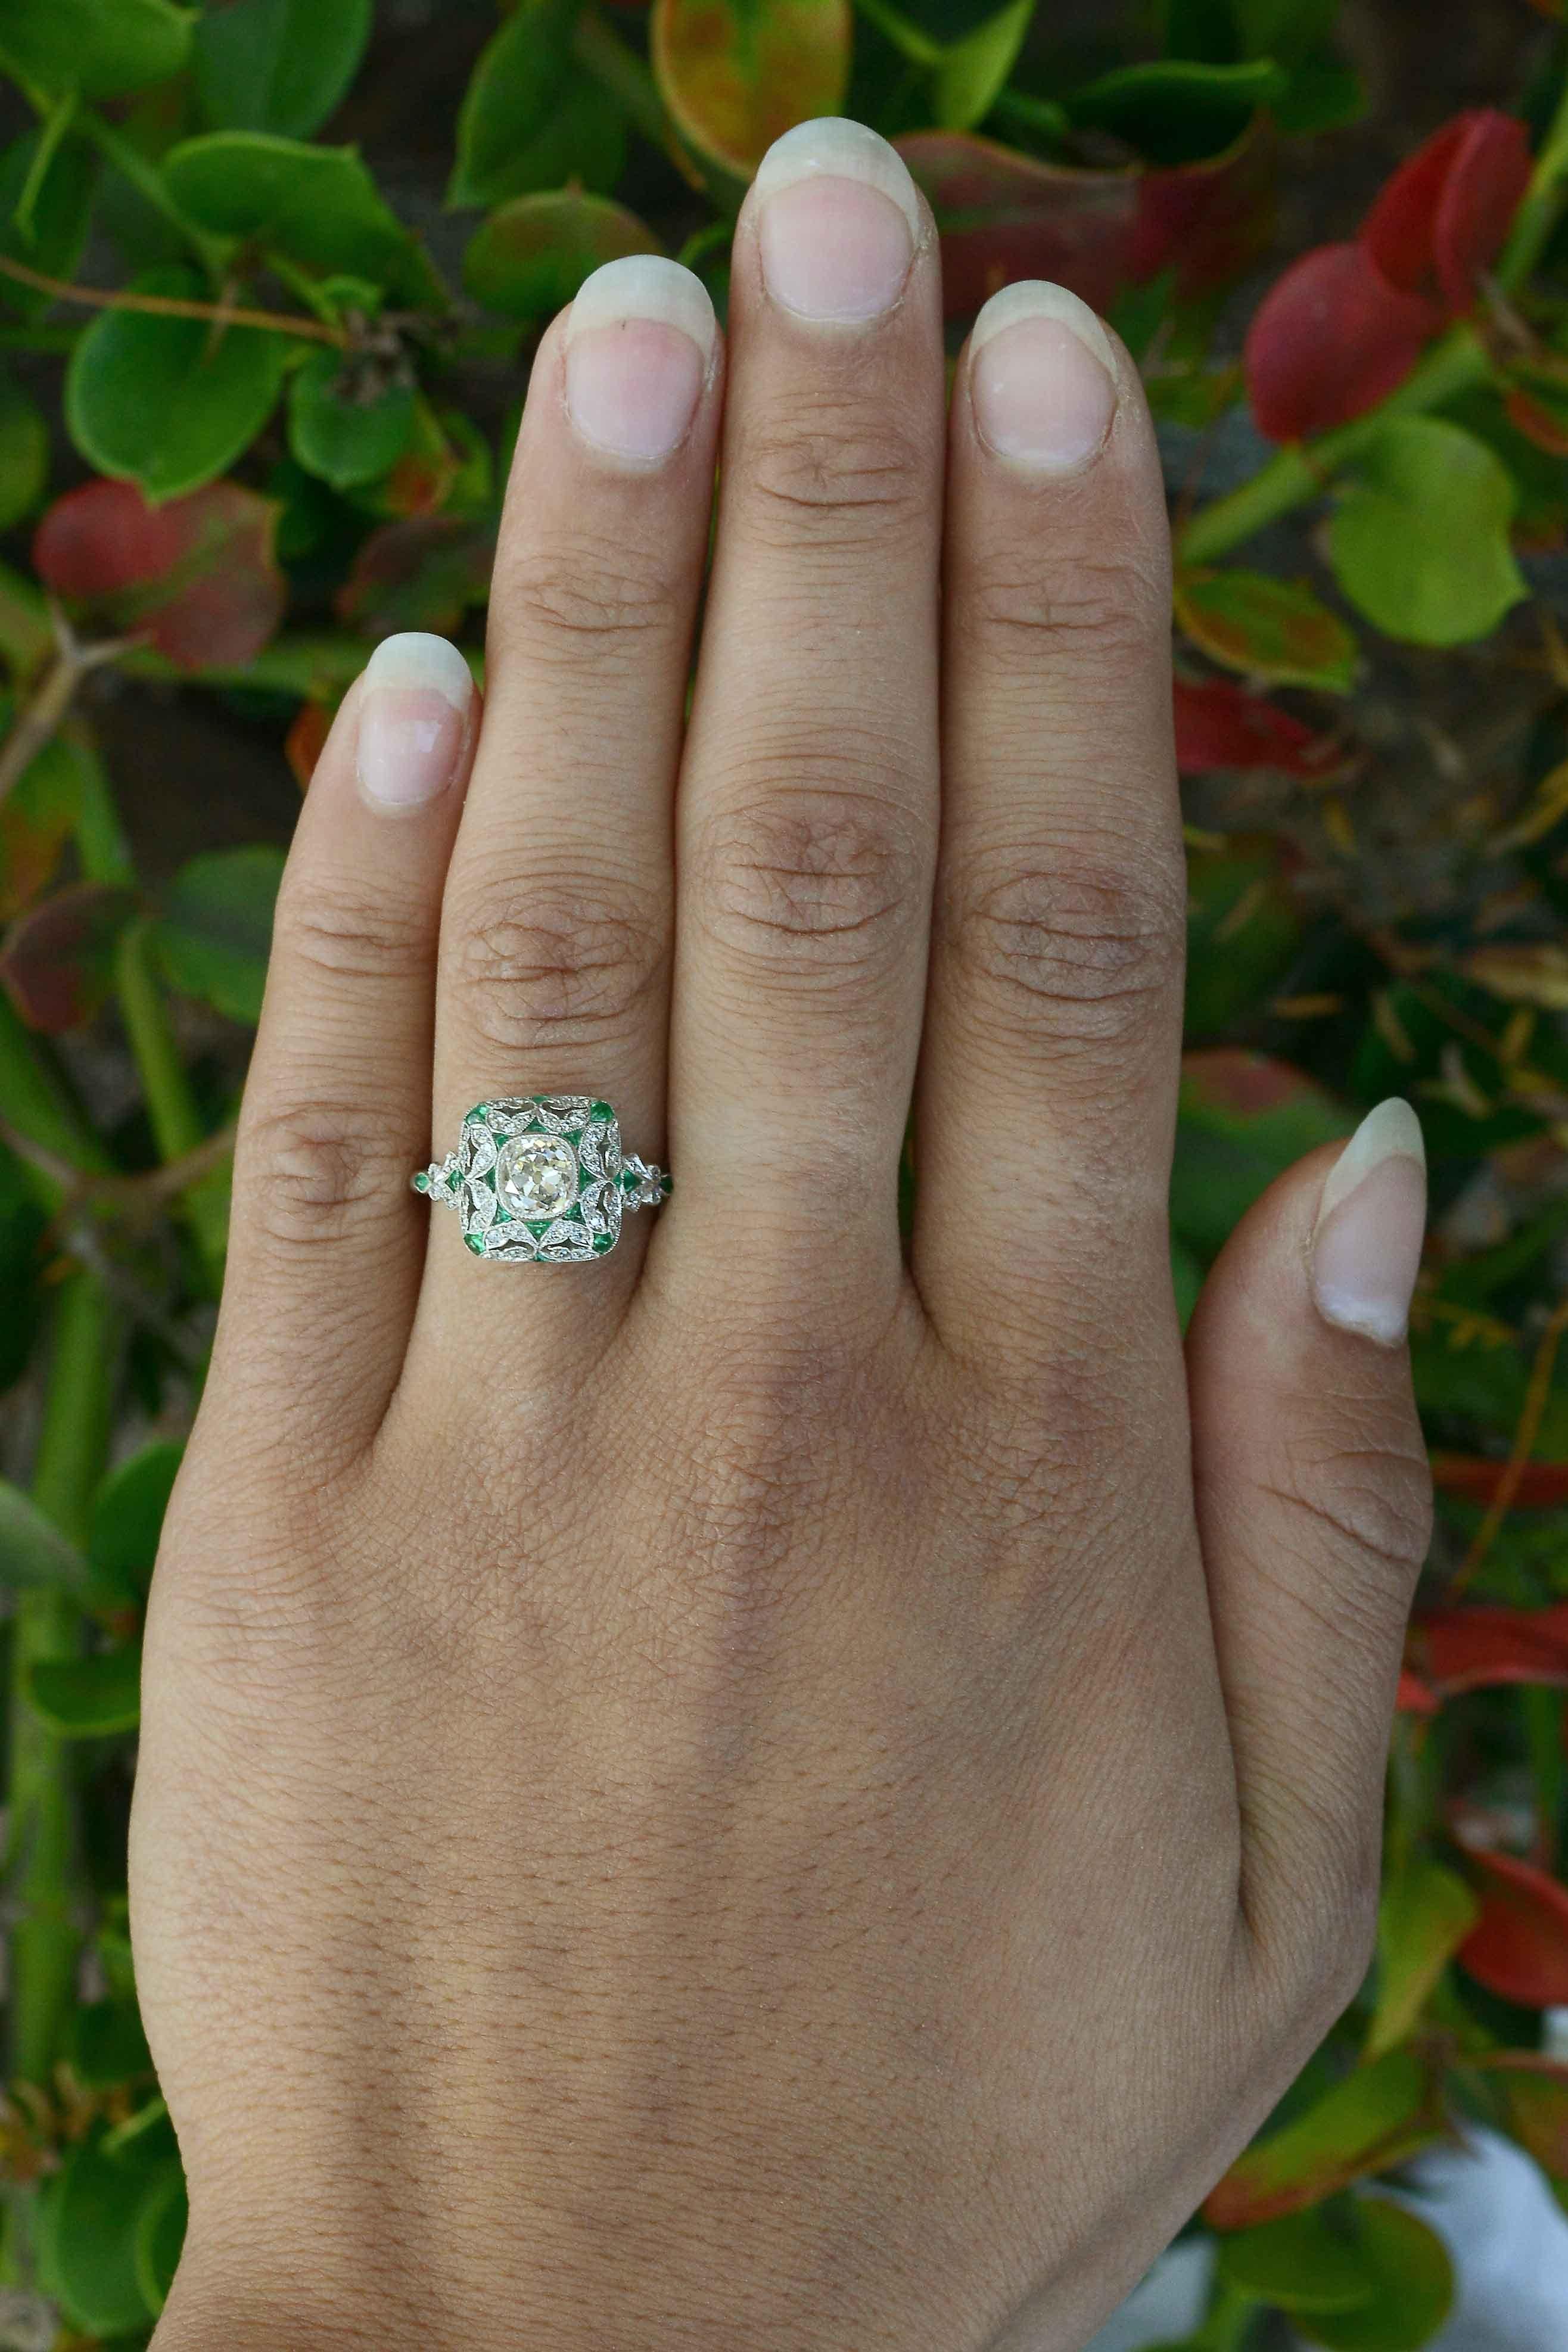 An diamond emerald engagement ring created as a micro mosaic dome, so mesmerizing and detailed. We love the milgrained leaves that embrace this fiery, dazzling, 1.12 carat old mine cut cushion diamond with a romantic, openwork design that rises like